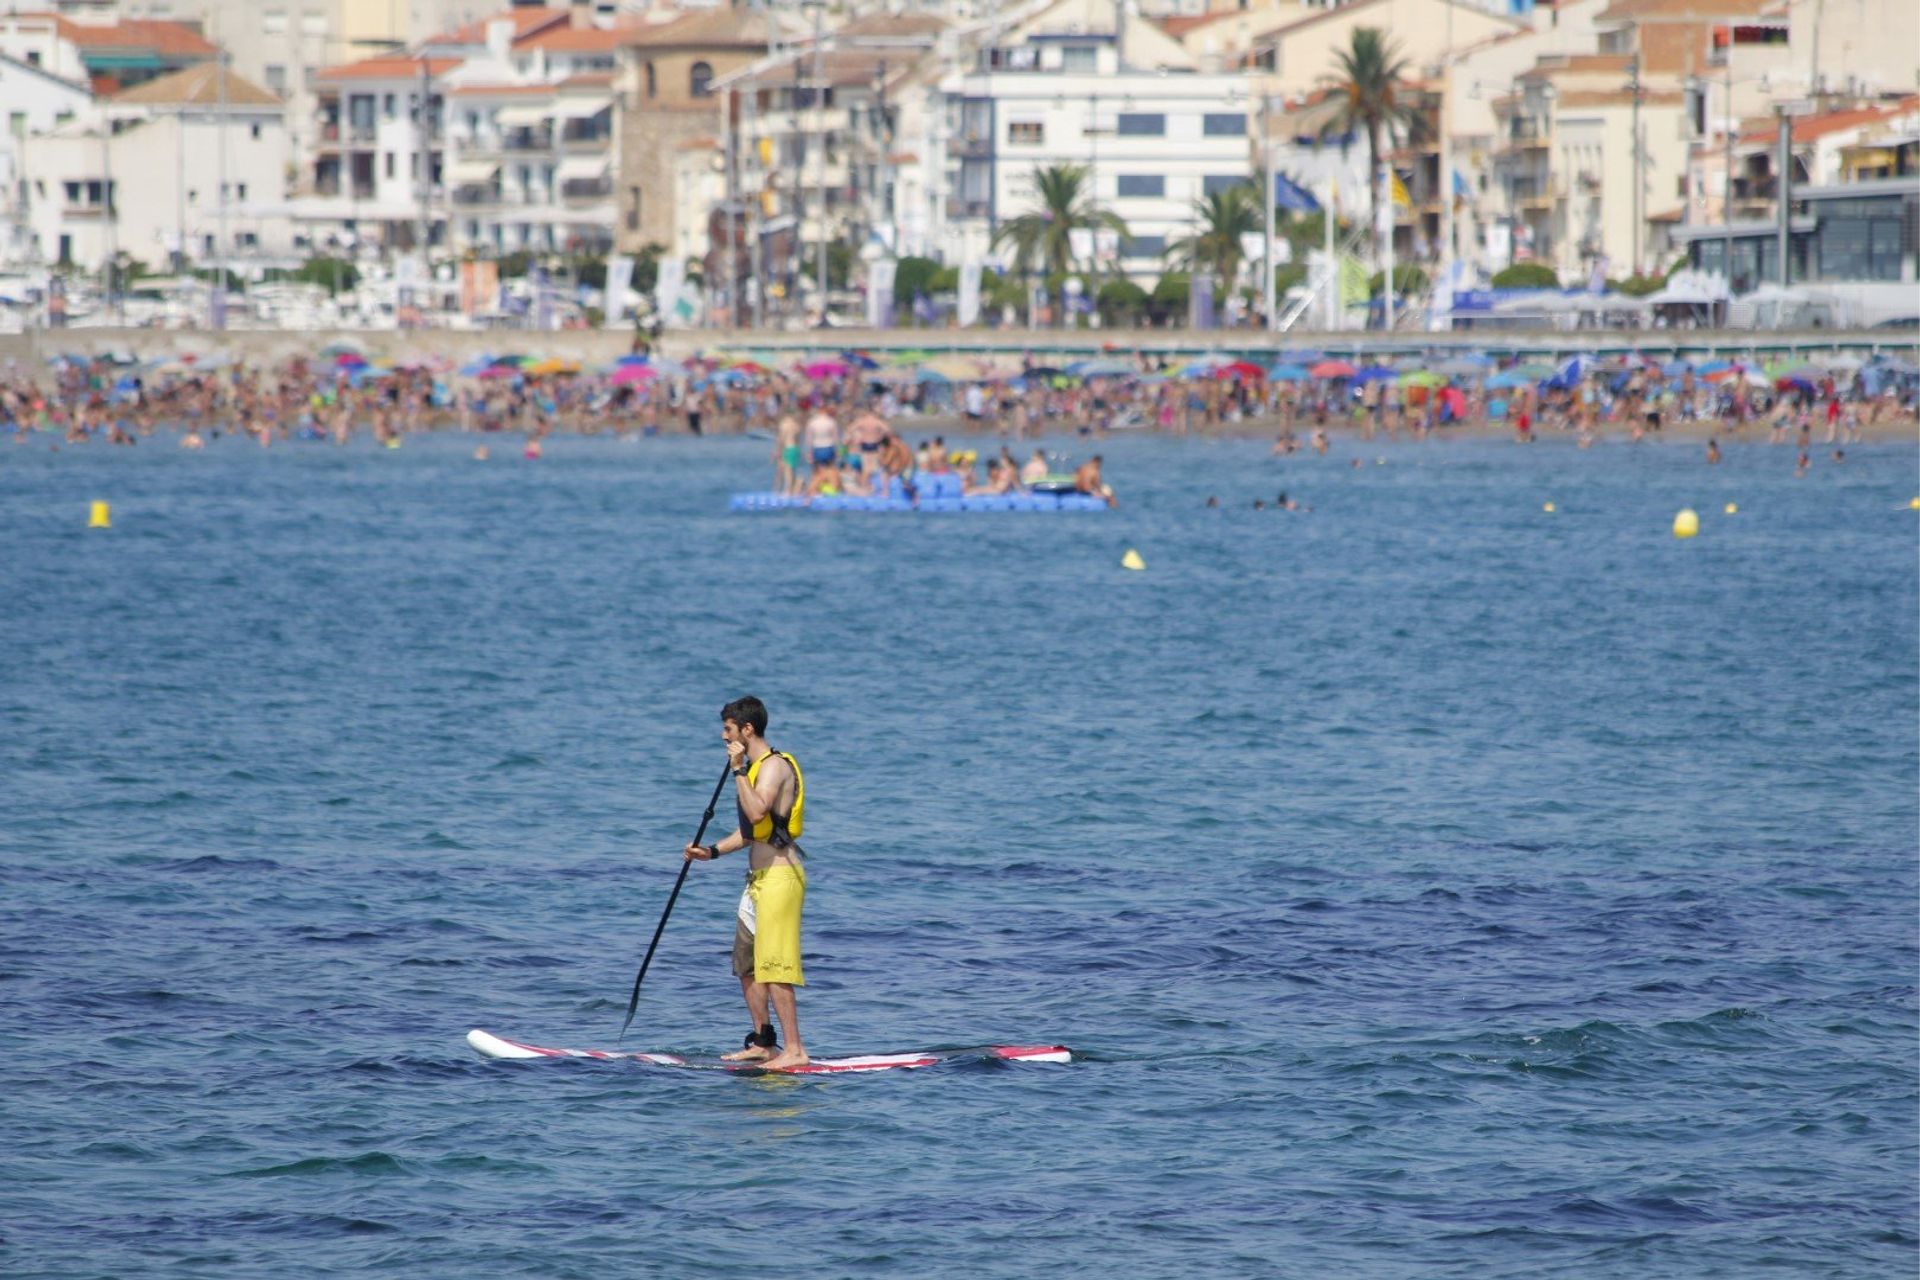 Paddleboarding on the beach